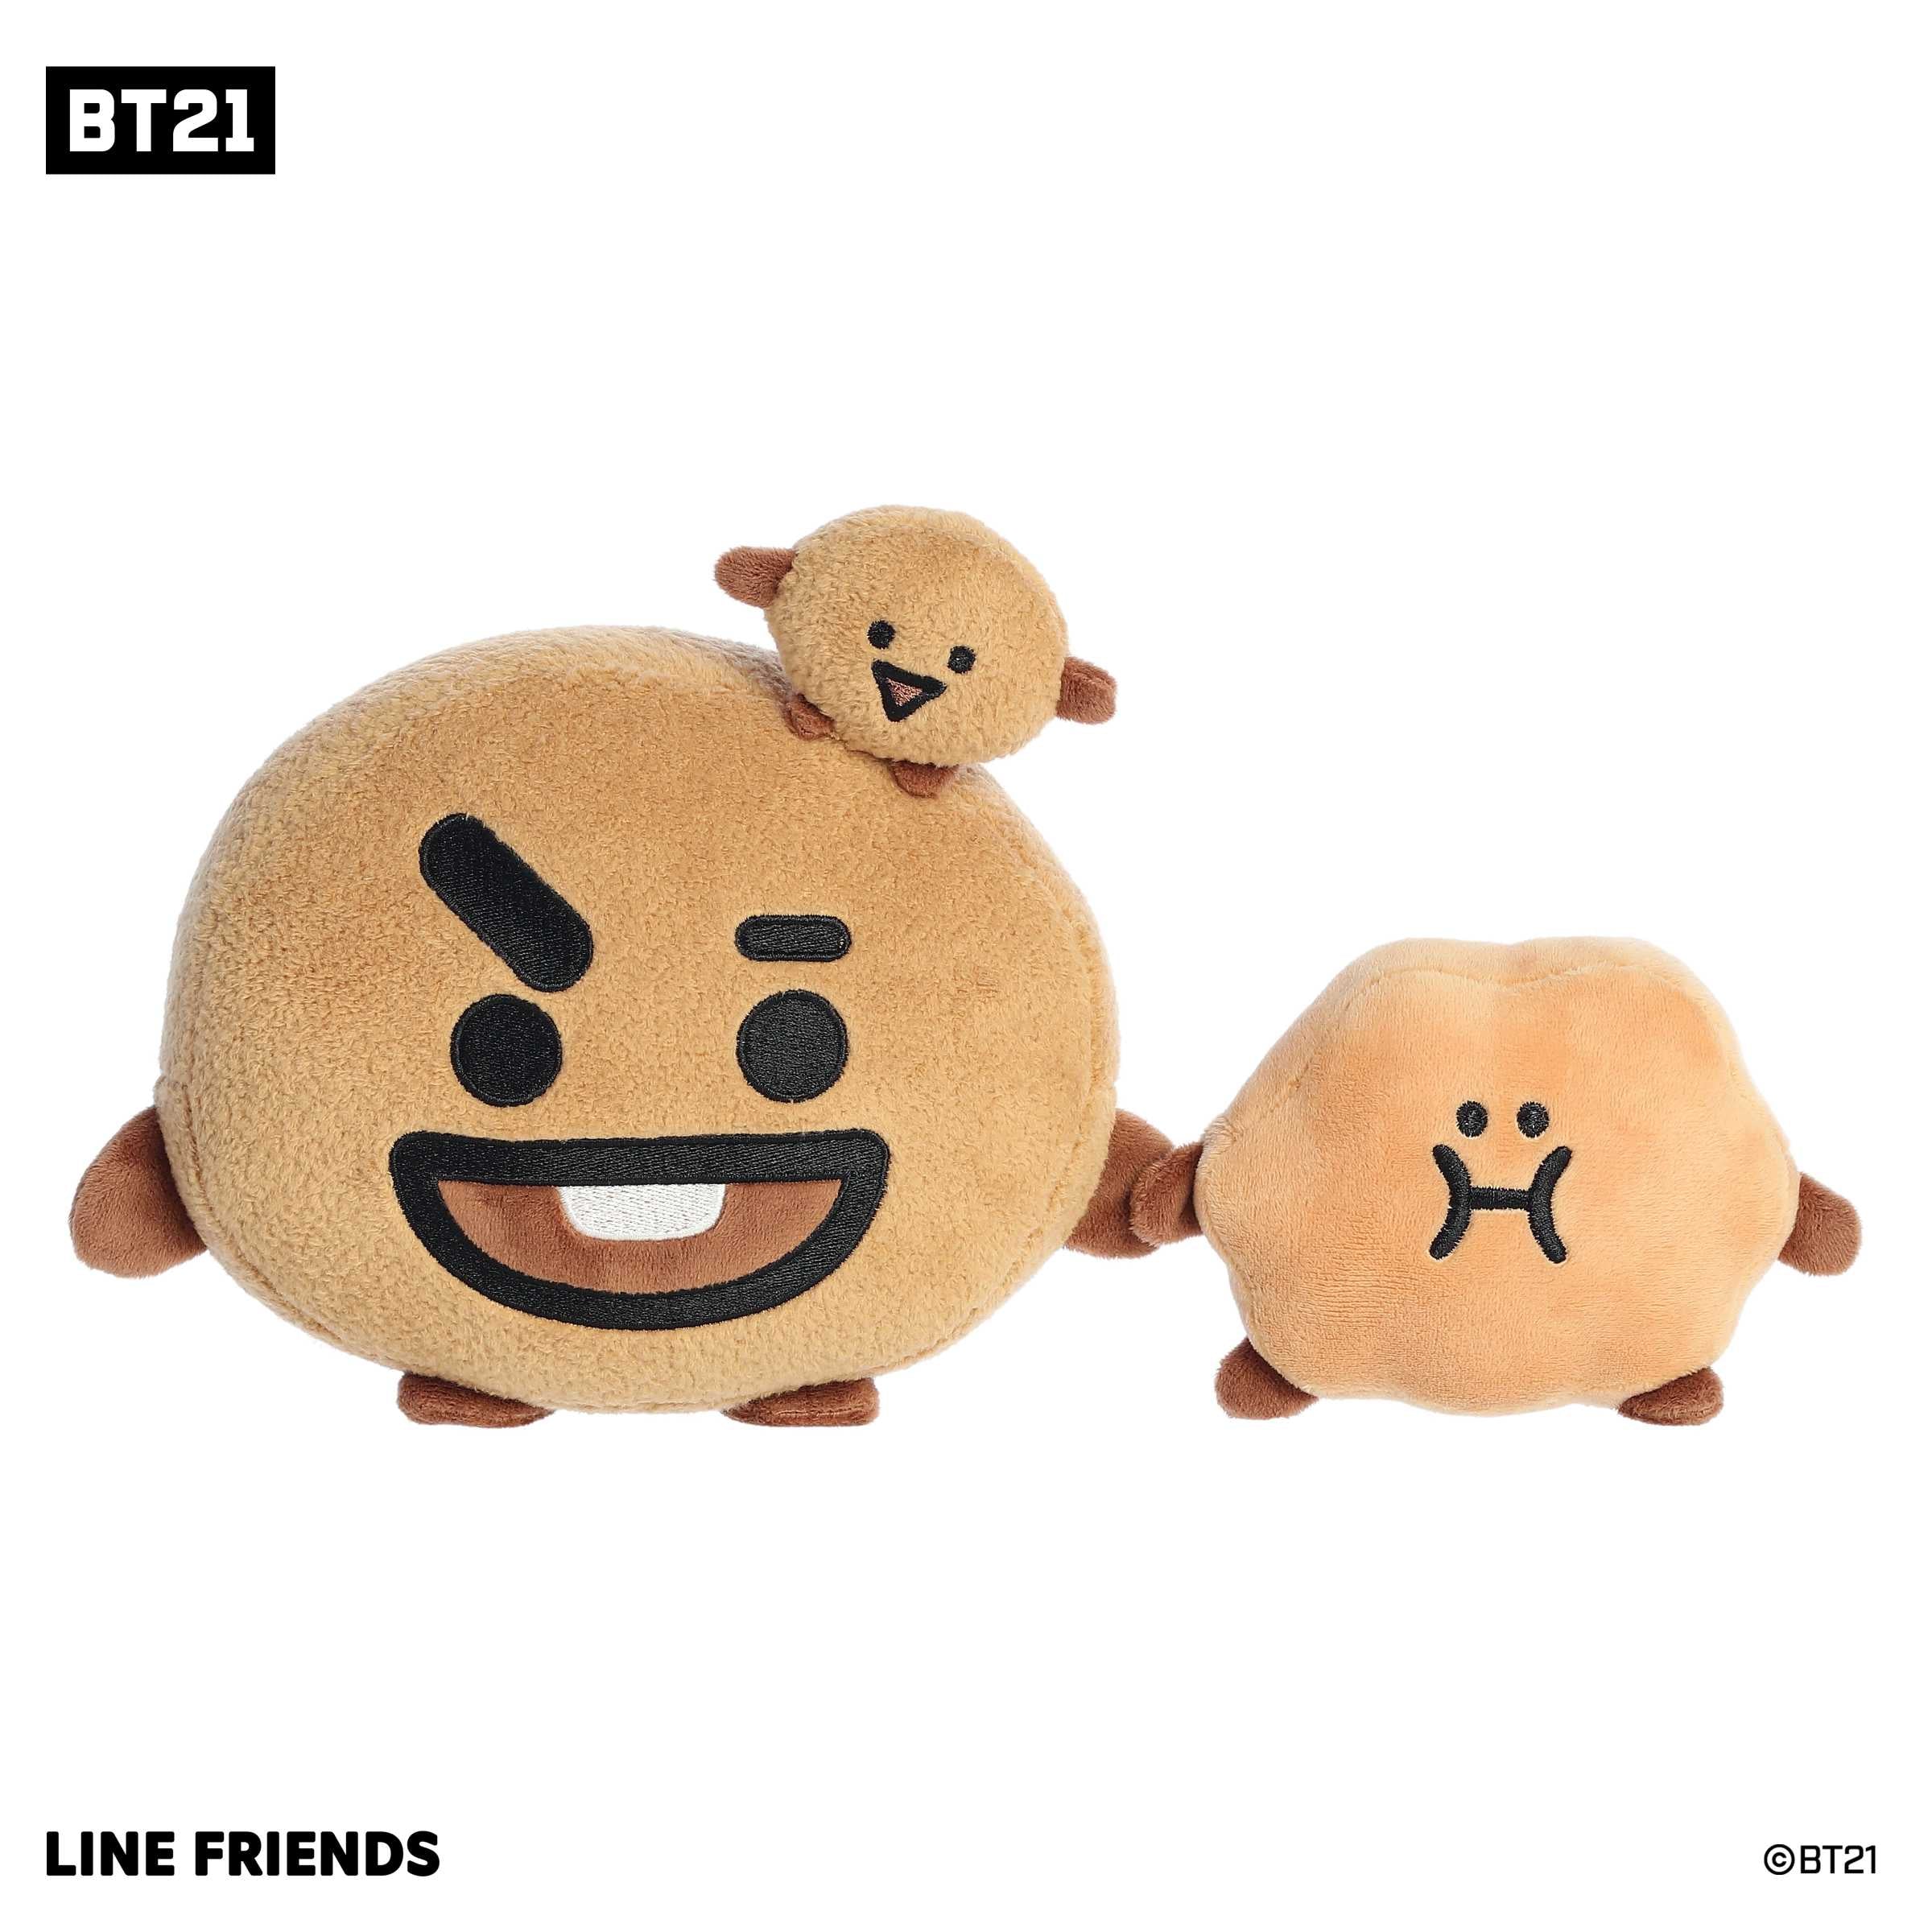 SHOOKY Plush in warm cookie brown, with a wide smile, representing BT21's playful prankster